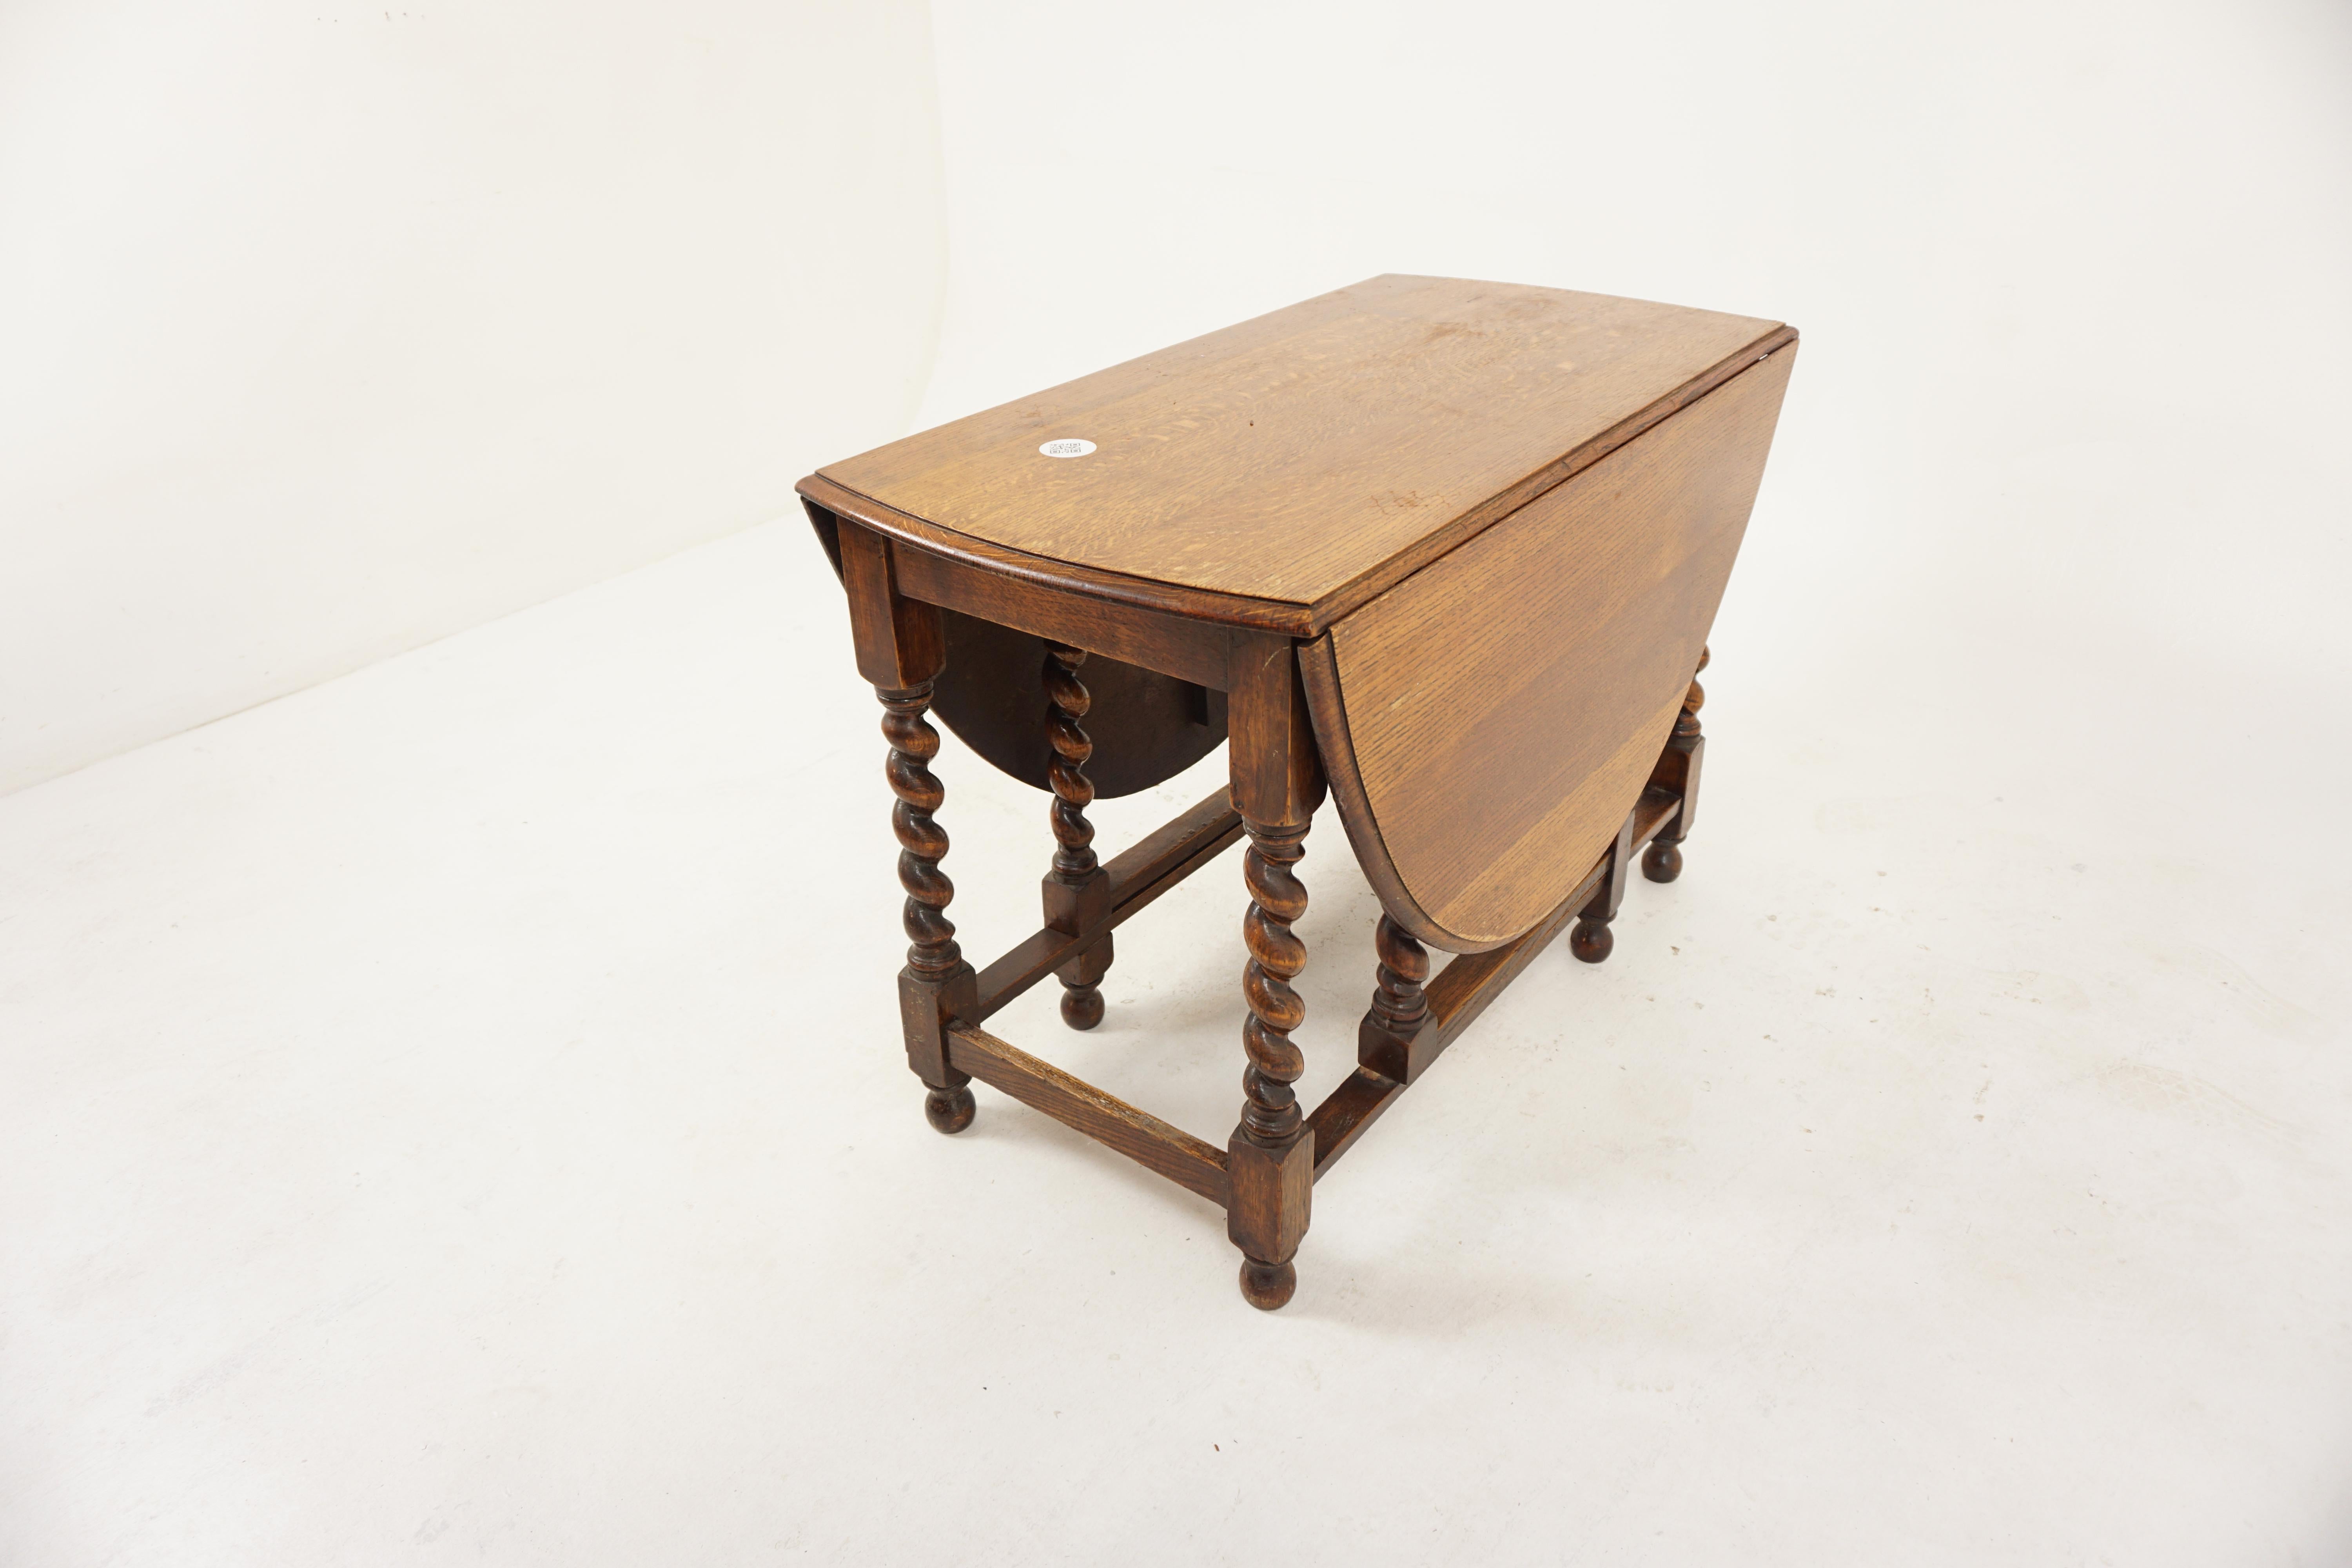 Ant. Barley Twist Oak Gateleg Table, Drop Leaf Table, Dining Table, Scotland 1910, H734

Scotland 1910
Solid Oak
Original Finish
Oval top with moulded edge
Pair of drop leaves to the sides
All standing on robust barley twist legs with connecting